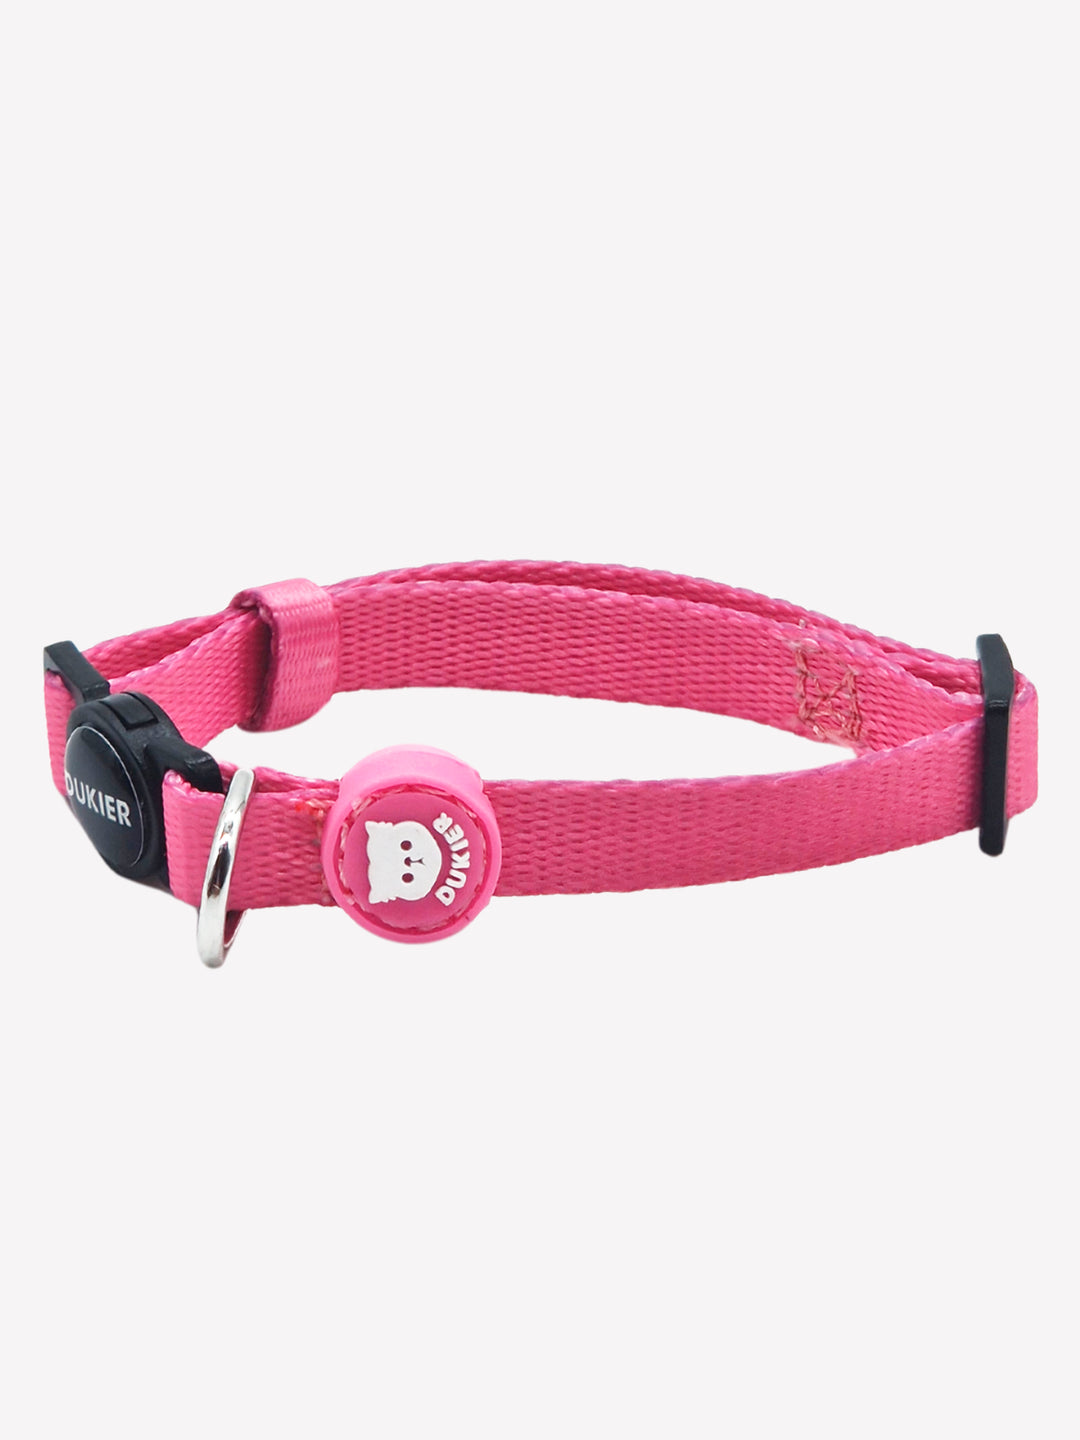 PINK COLLAR FOR CAT